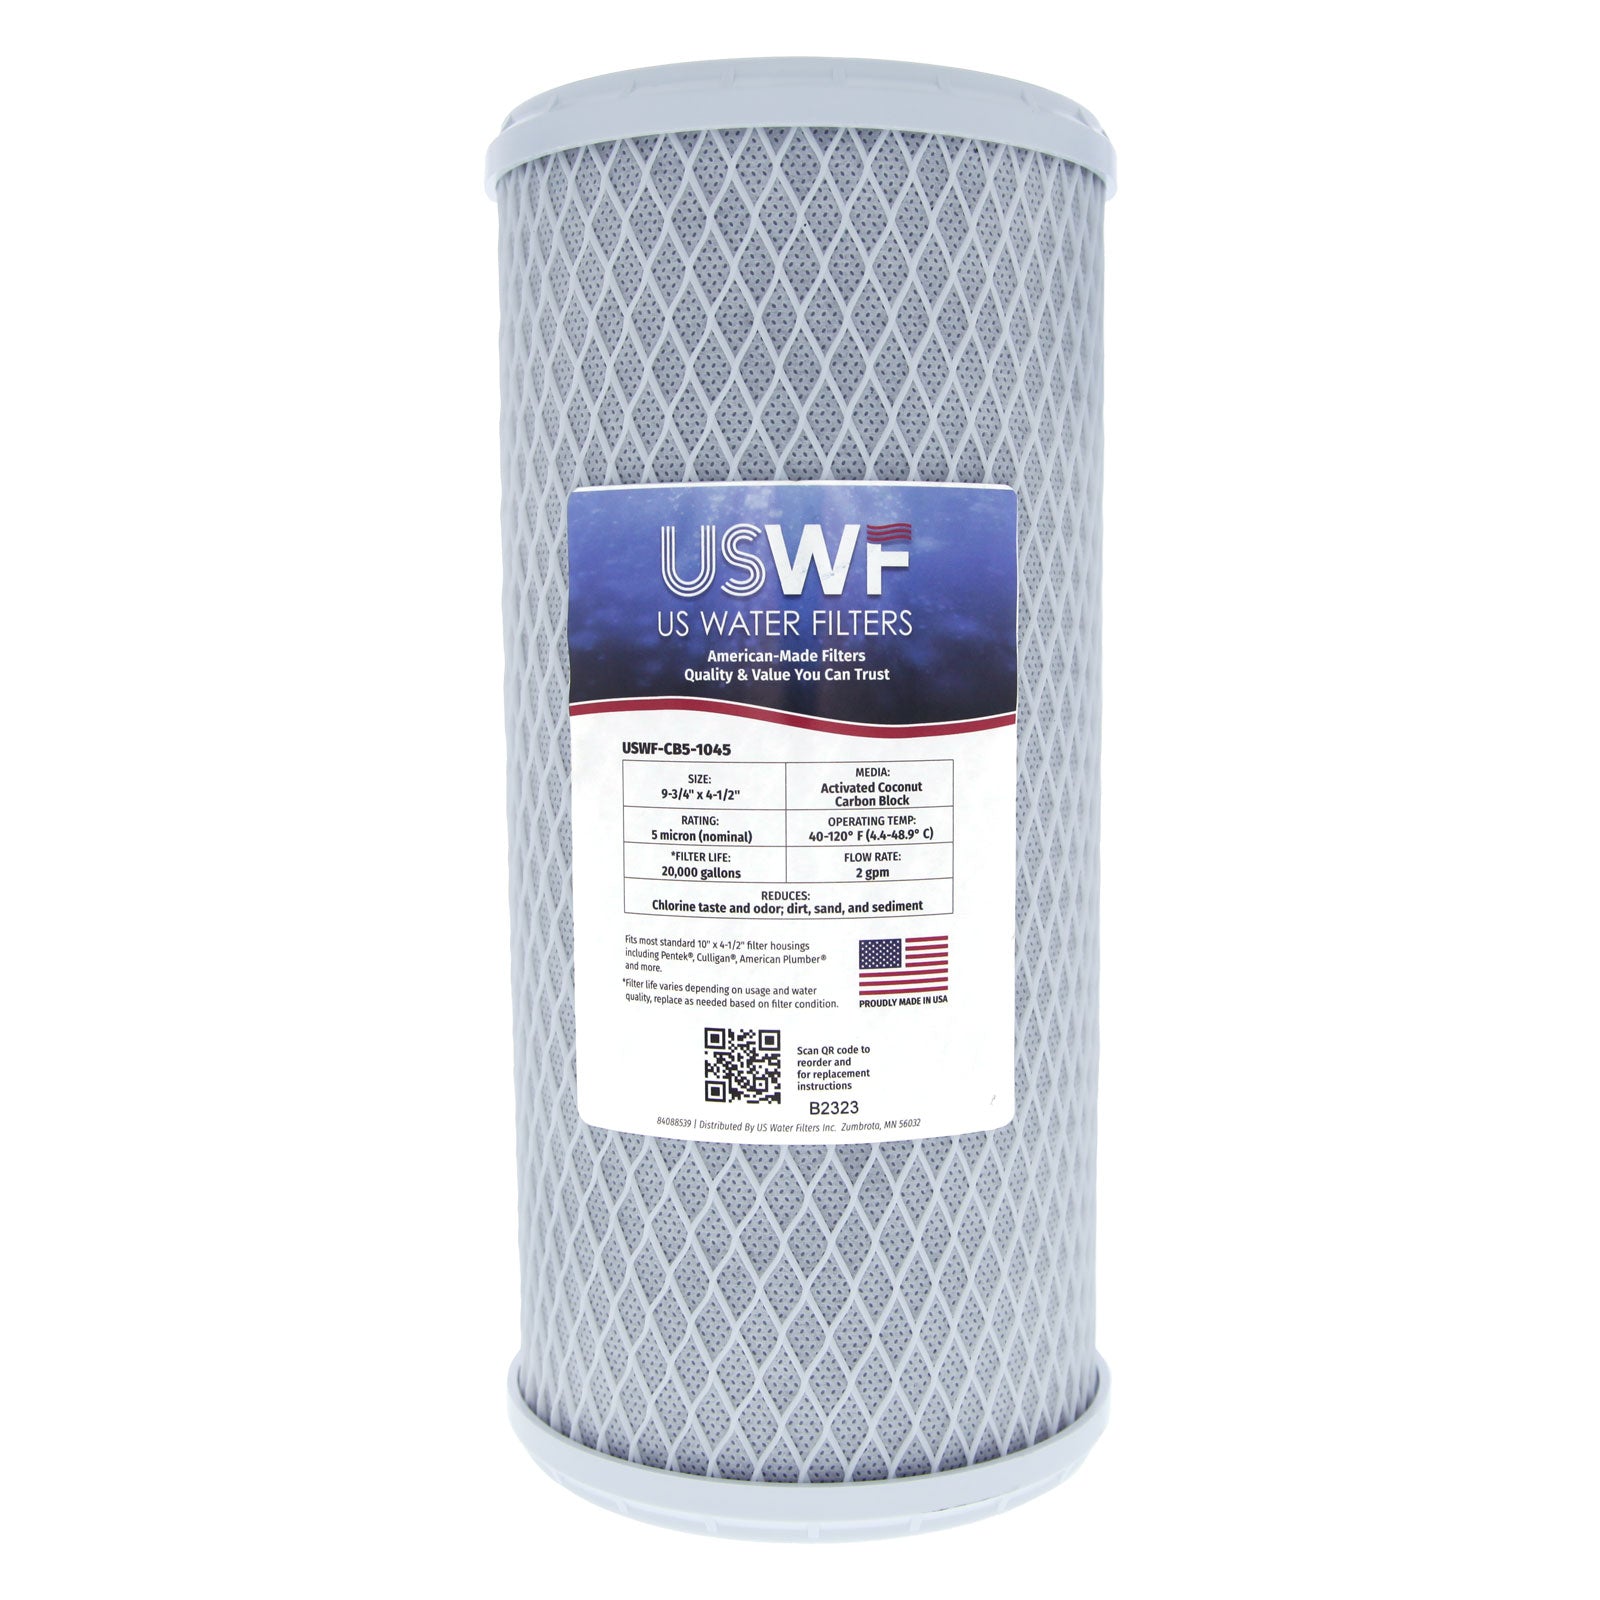 Coconut Carbon Block Filter by USWF 5 Micron 10"x4.5"